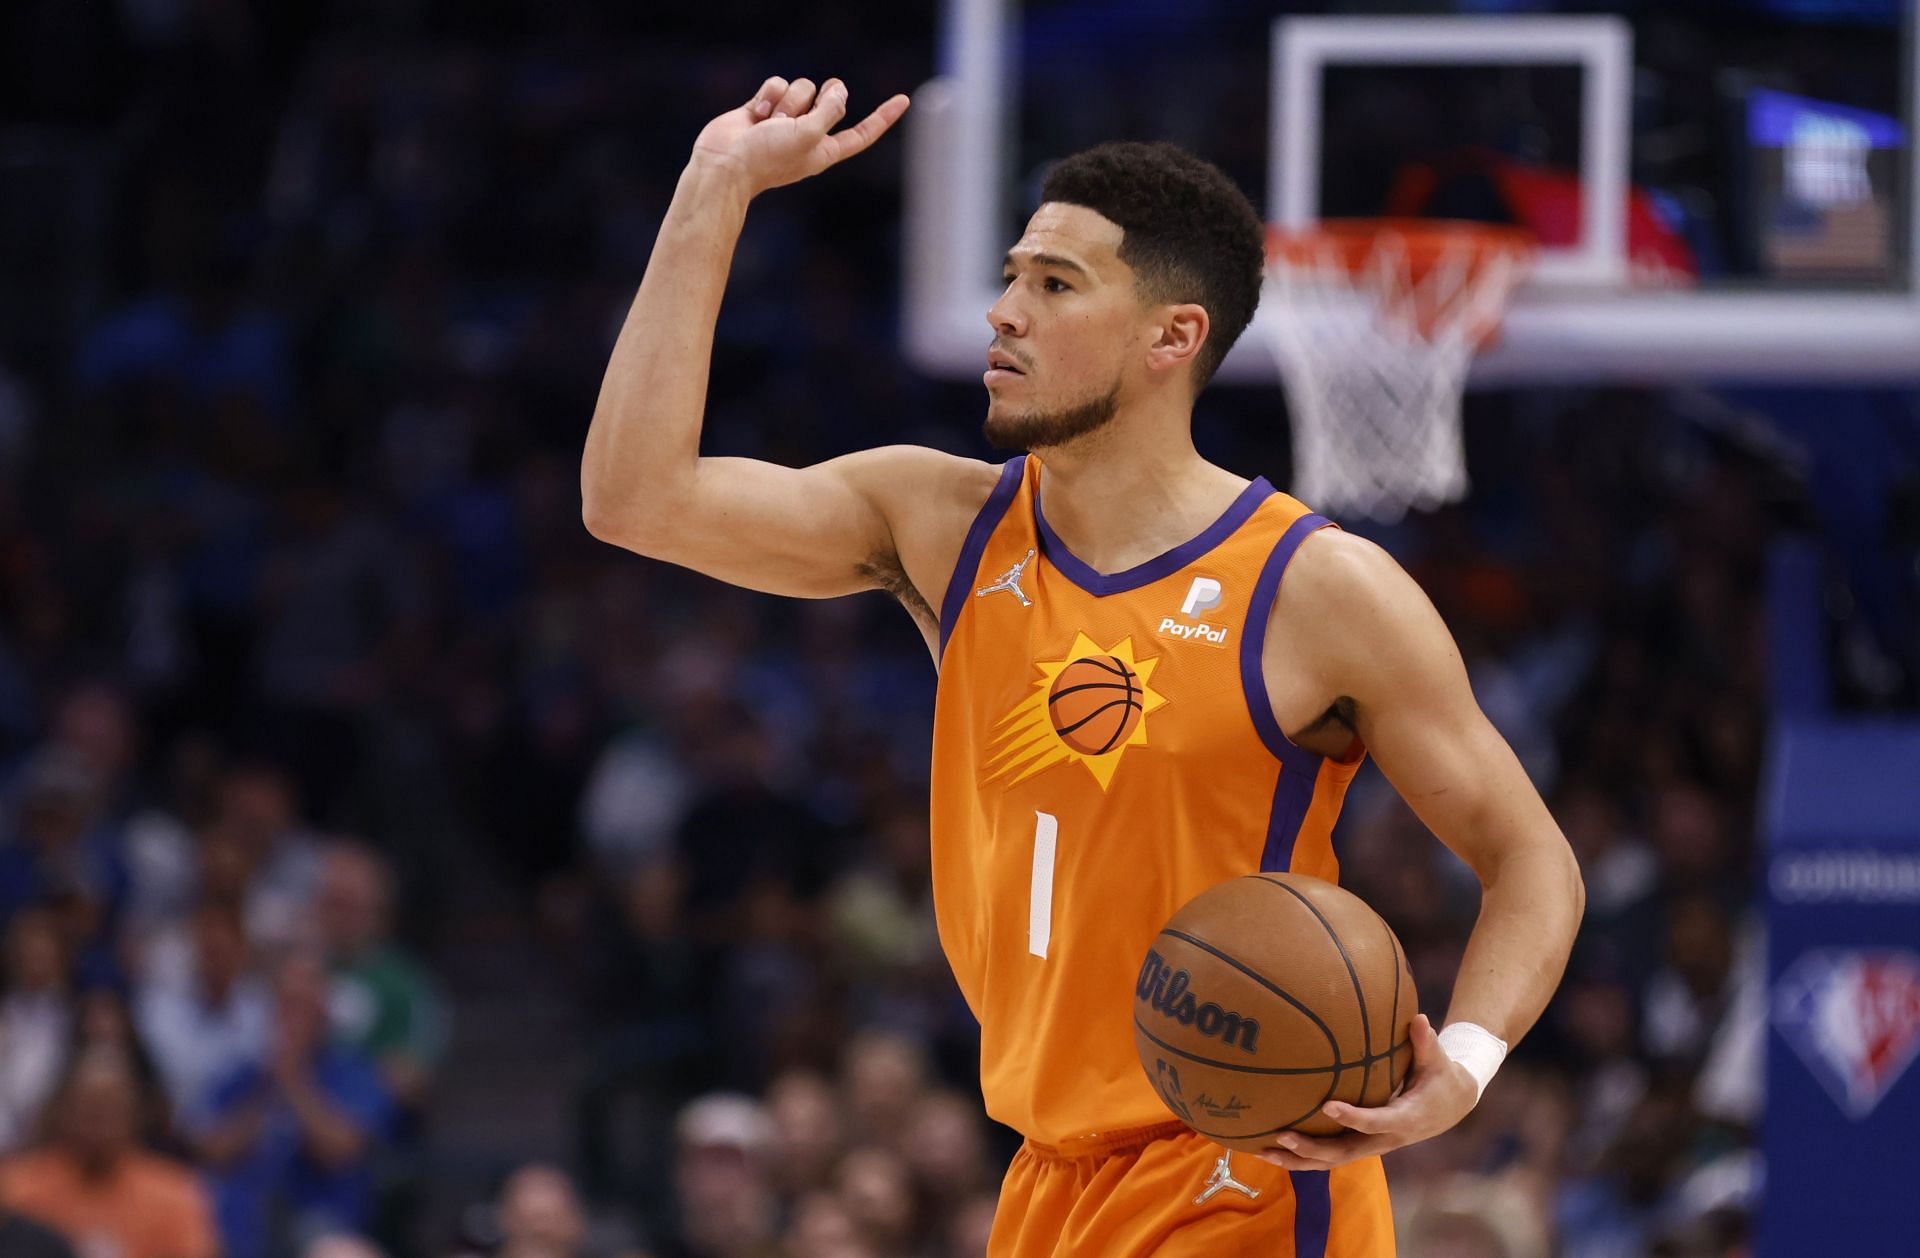 It was 2 instances of utter disrespect for the great Luka Doncic” - Nick  Wright believes the basketball gods punished Chris Paul and Devin Booker  for their behaviour towards the Mavericks